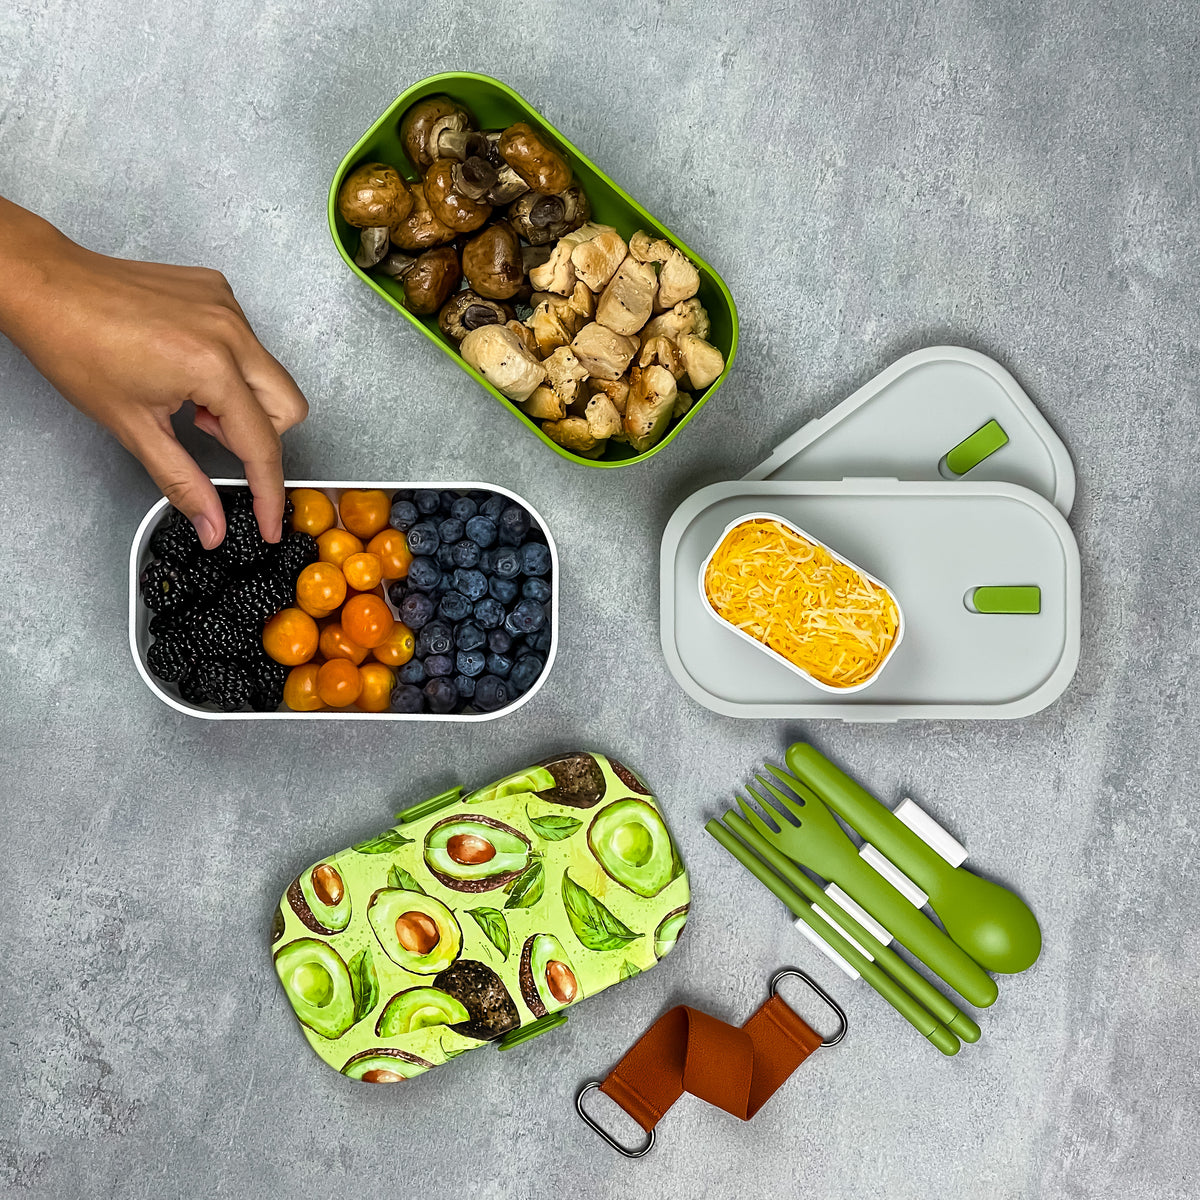 Positively Fresh Bento Lunch Box - A Healthy Choice for On-The-Go